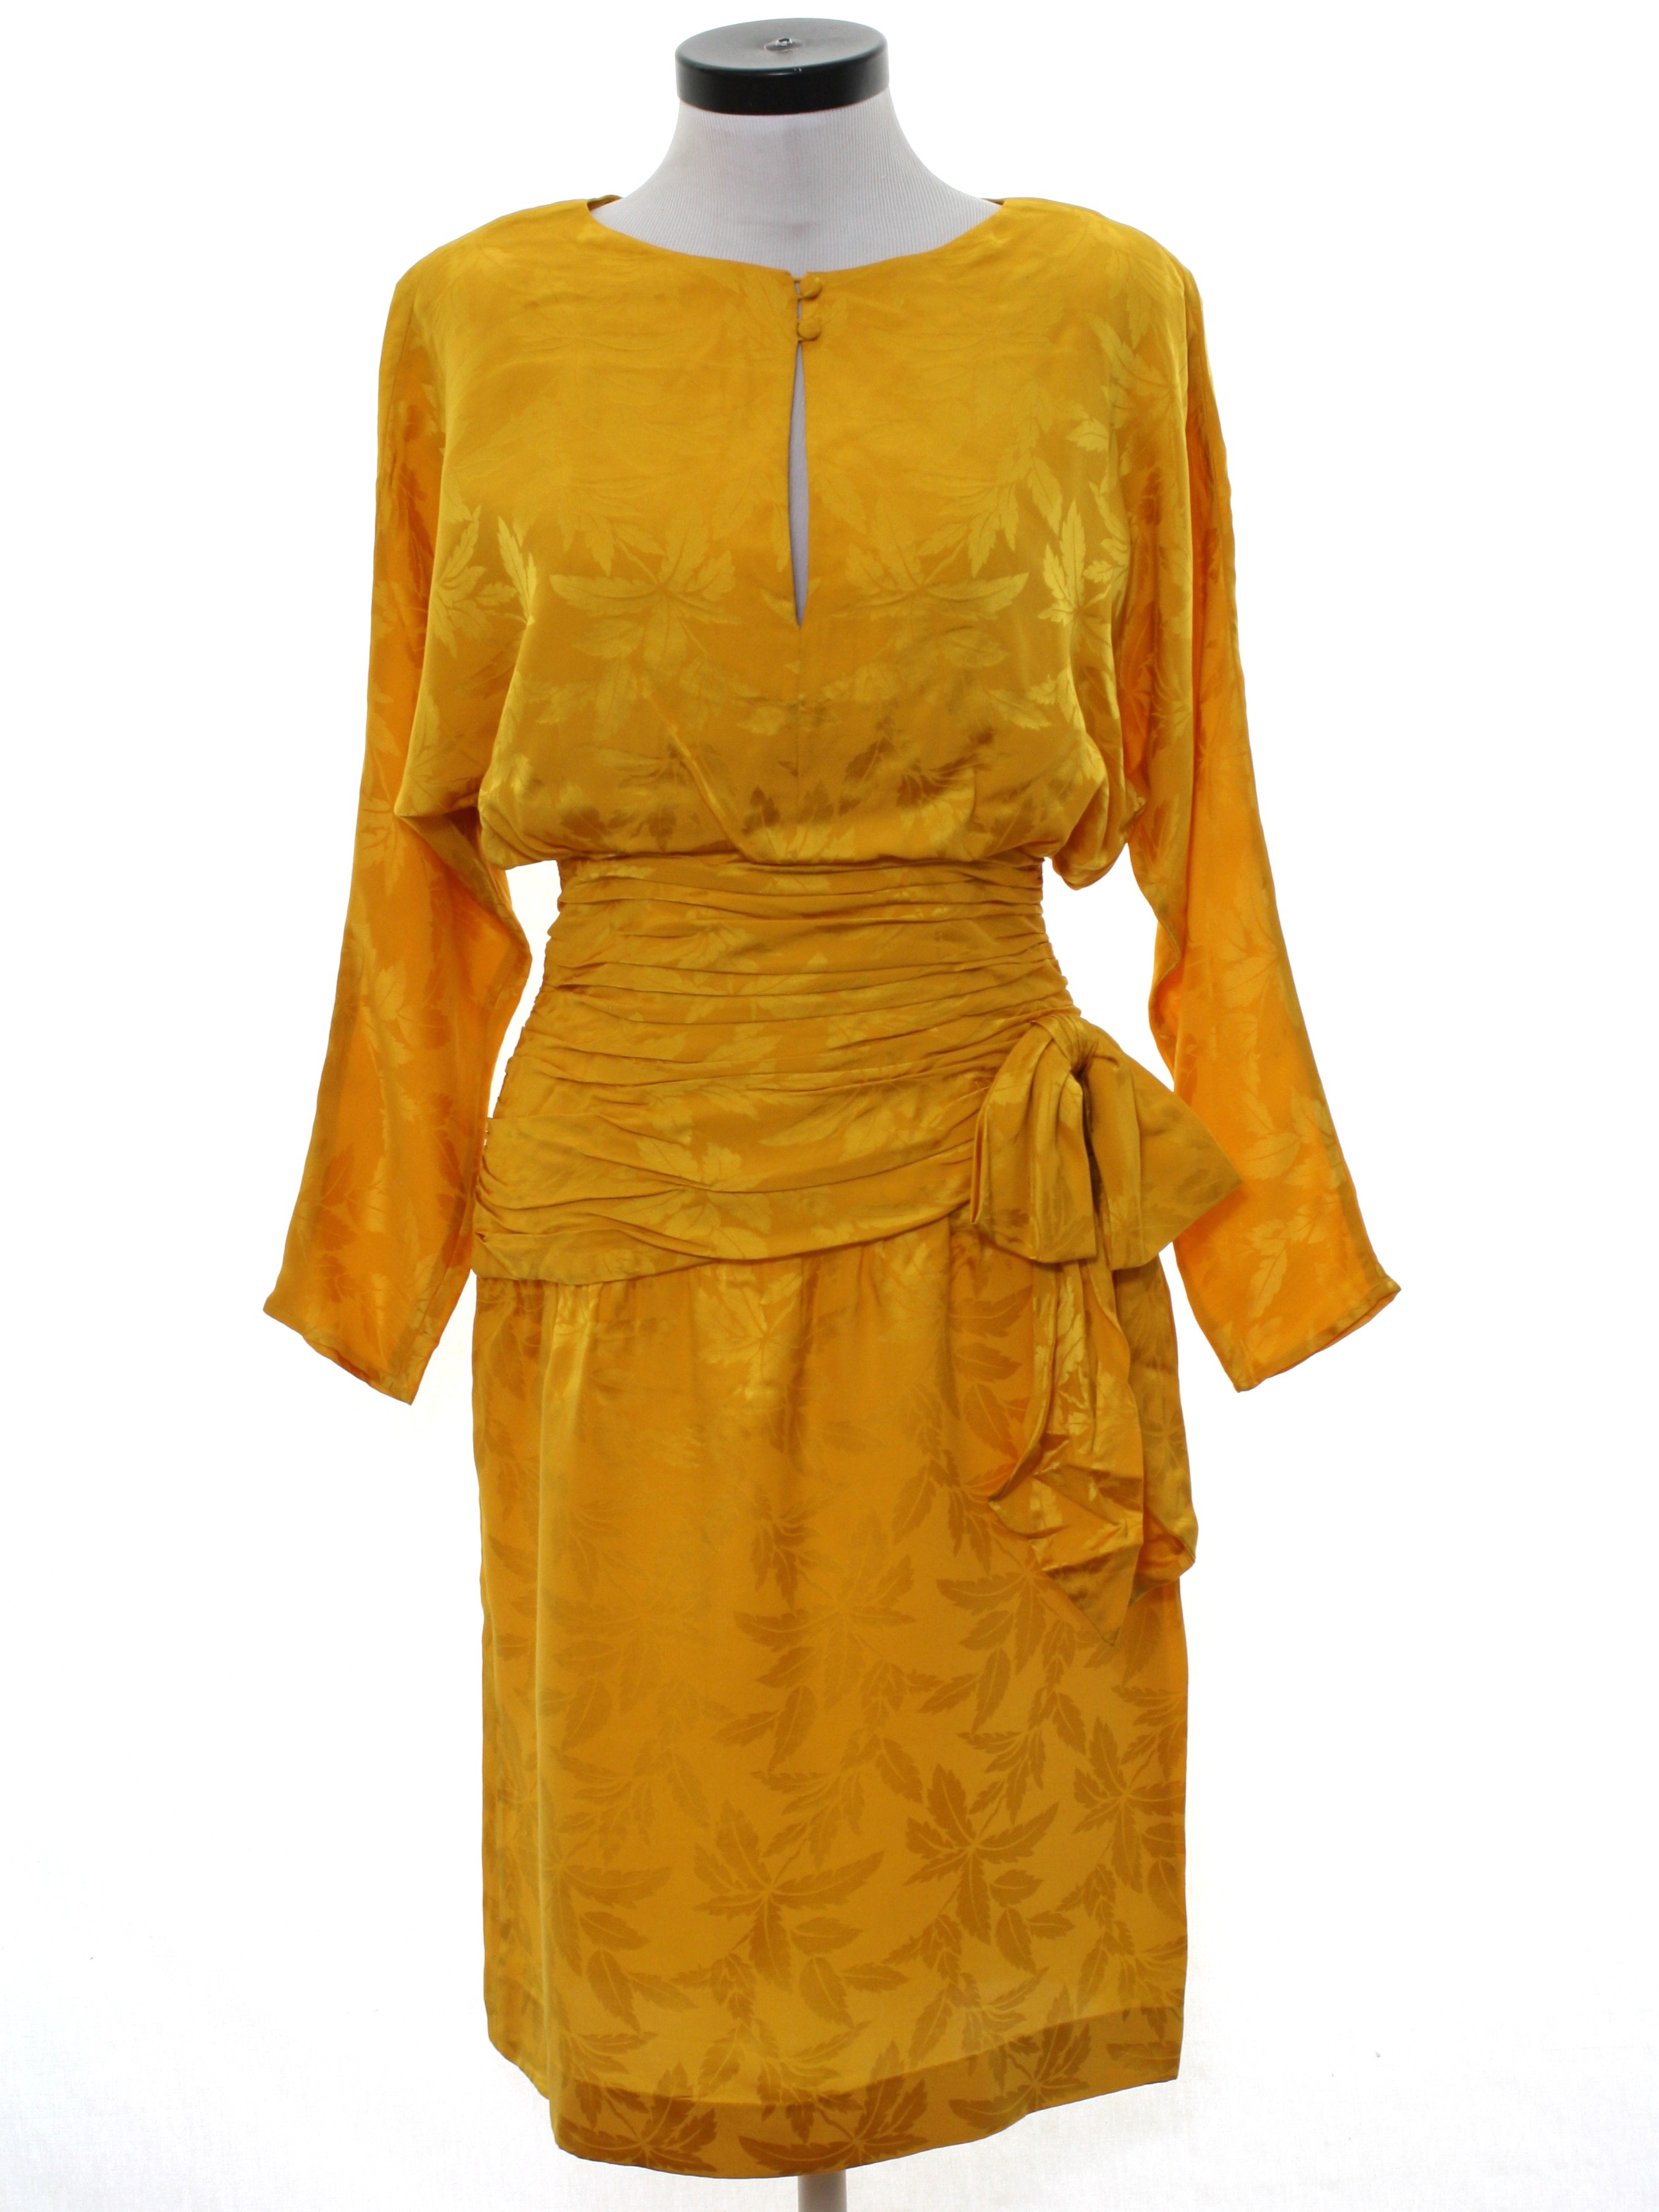 Vintage 1980's Cocktail Dress: 80s -AJ Bari- Womens mustard yellow with